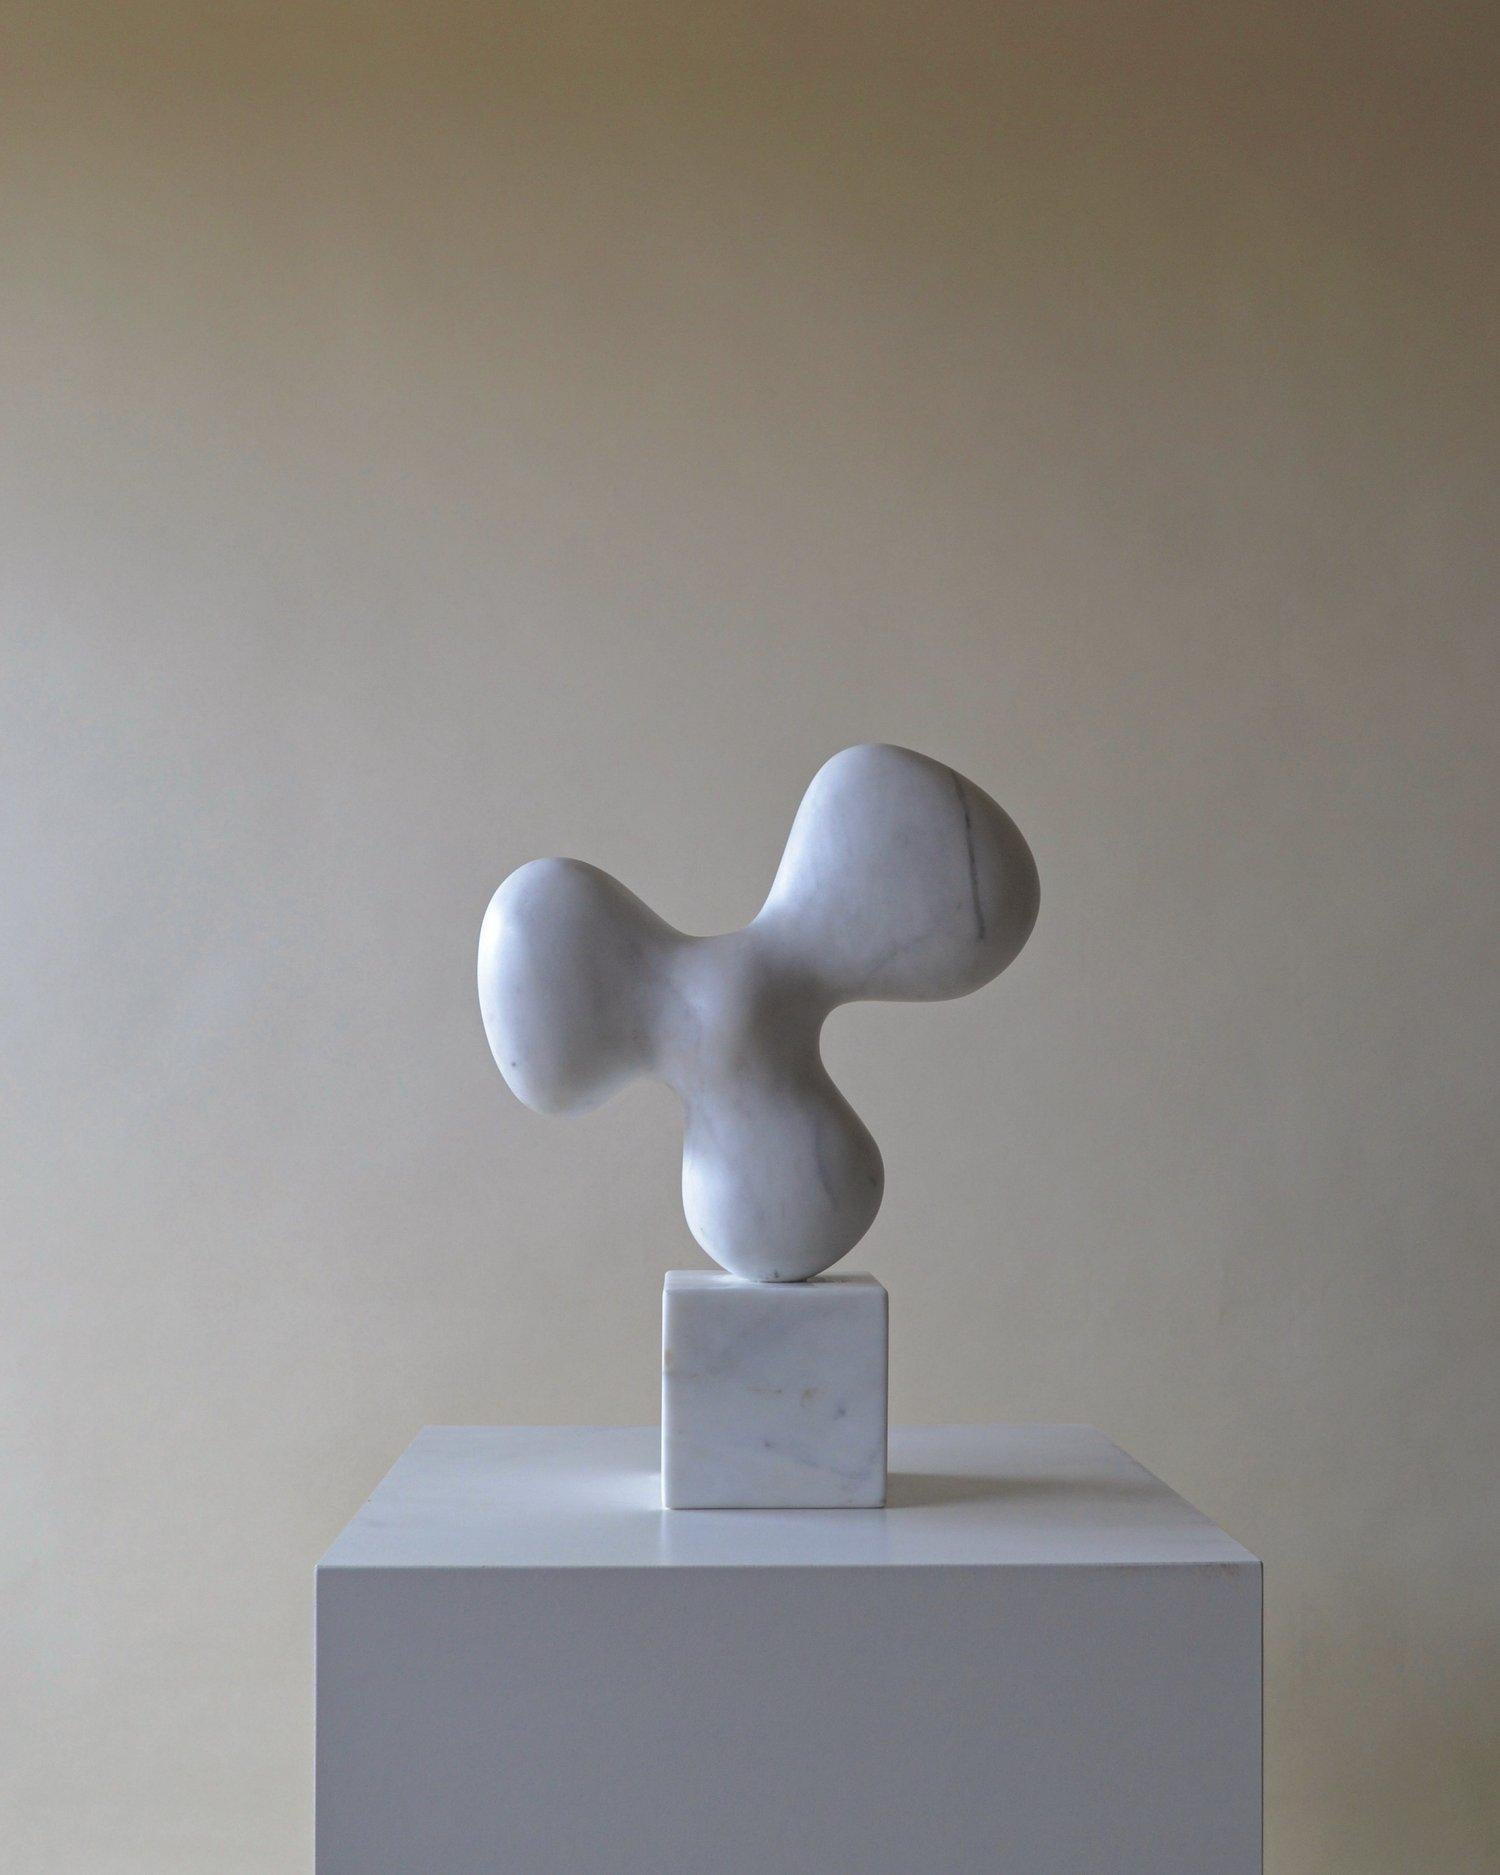 Warbble Sculpture by Chandler McLellan
Limited Edition of 10 Pieces.
Dimensions: D 10.2 x W 25.4 x H 35.6 cm. 
Materials: Marble.

Other marble options are available. Please contact us.

Chandler McLellan
I was born in 1993 in Fort Wayne, Indiana. I